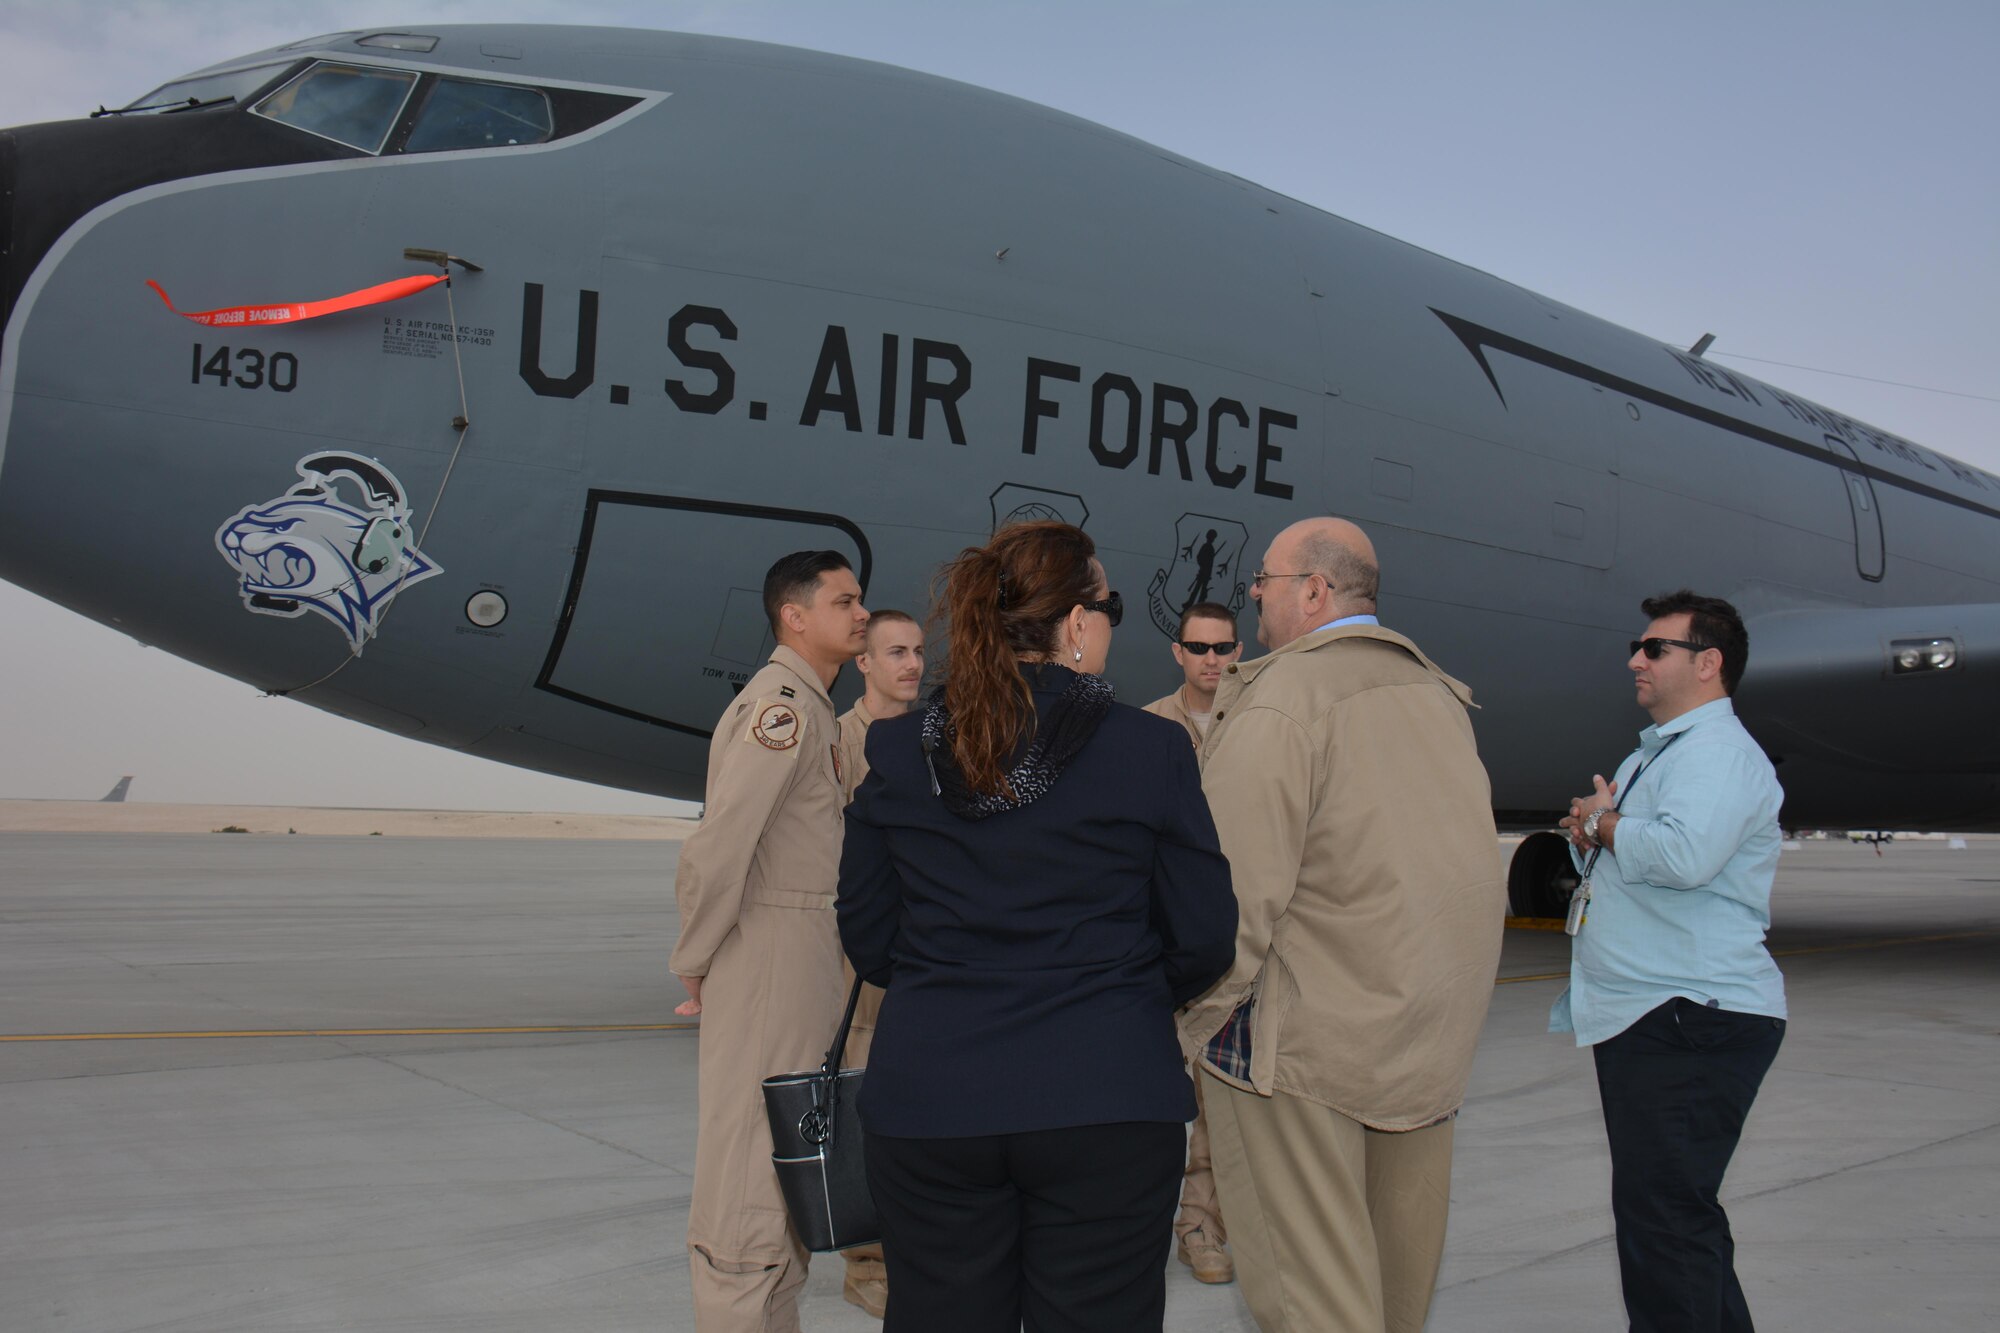 Attendees of the annual Flight Line Fest at Al Udeid Air Base, Qatar, Jan. 10 meet the crew of a KC-135 Stratotanker deployed from the 157th Air Refueling Wing in New Hampshire. The KC-135 fleet at AUAB, the largest in the world, flew more than 100,000 combat hours in 2015. The KC-135 was one of five U.S. Air Force aircraft on display during the event. Flight Line Fest is a joint partnership between the 379th Air Expeditionary Wing and Qatar Emiri Air Force held to foster relations between Qatar and the United States. (U.S. Air Force photo by Tech. Sgt. James Hodgman/Released)